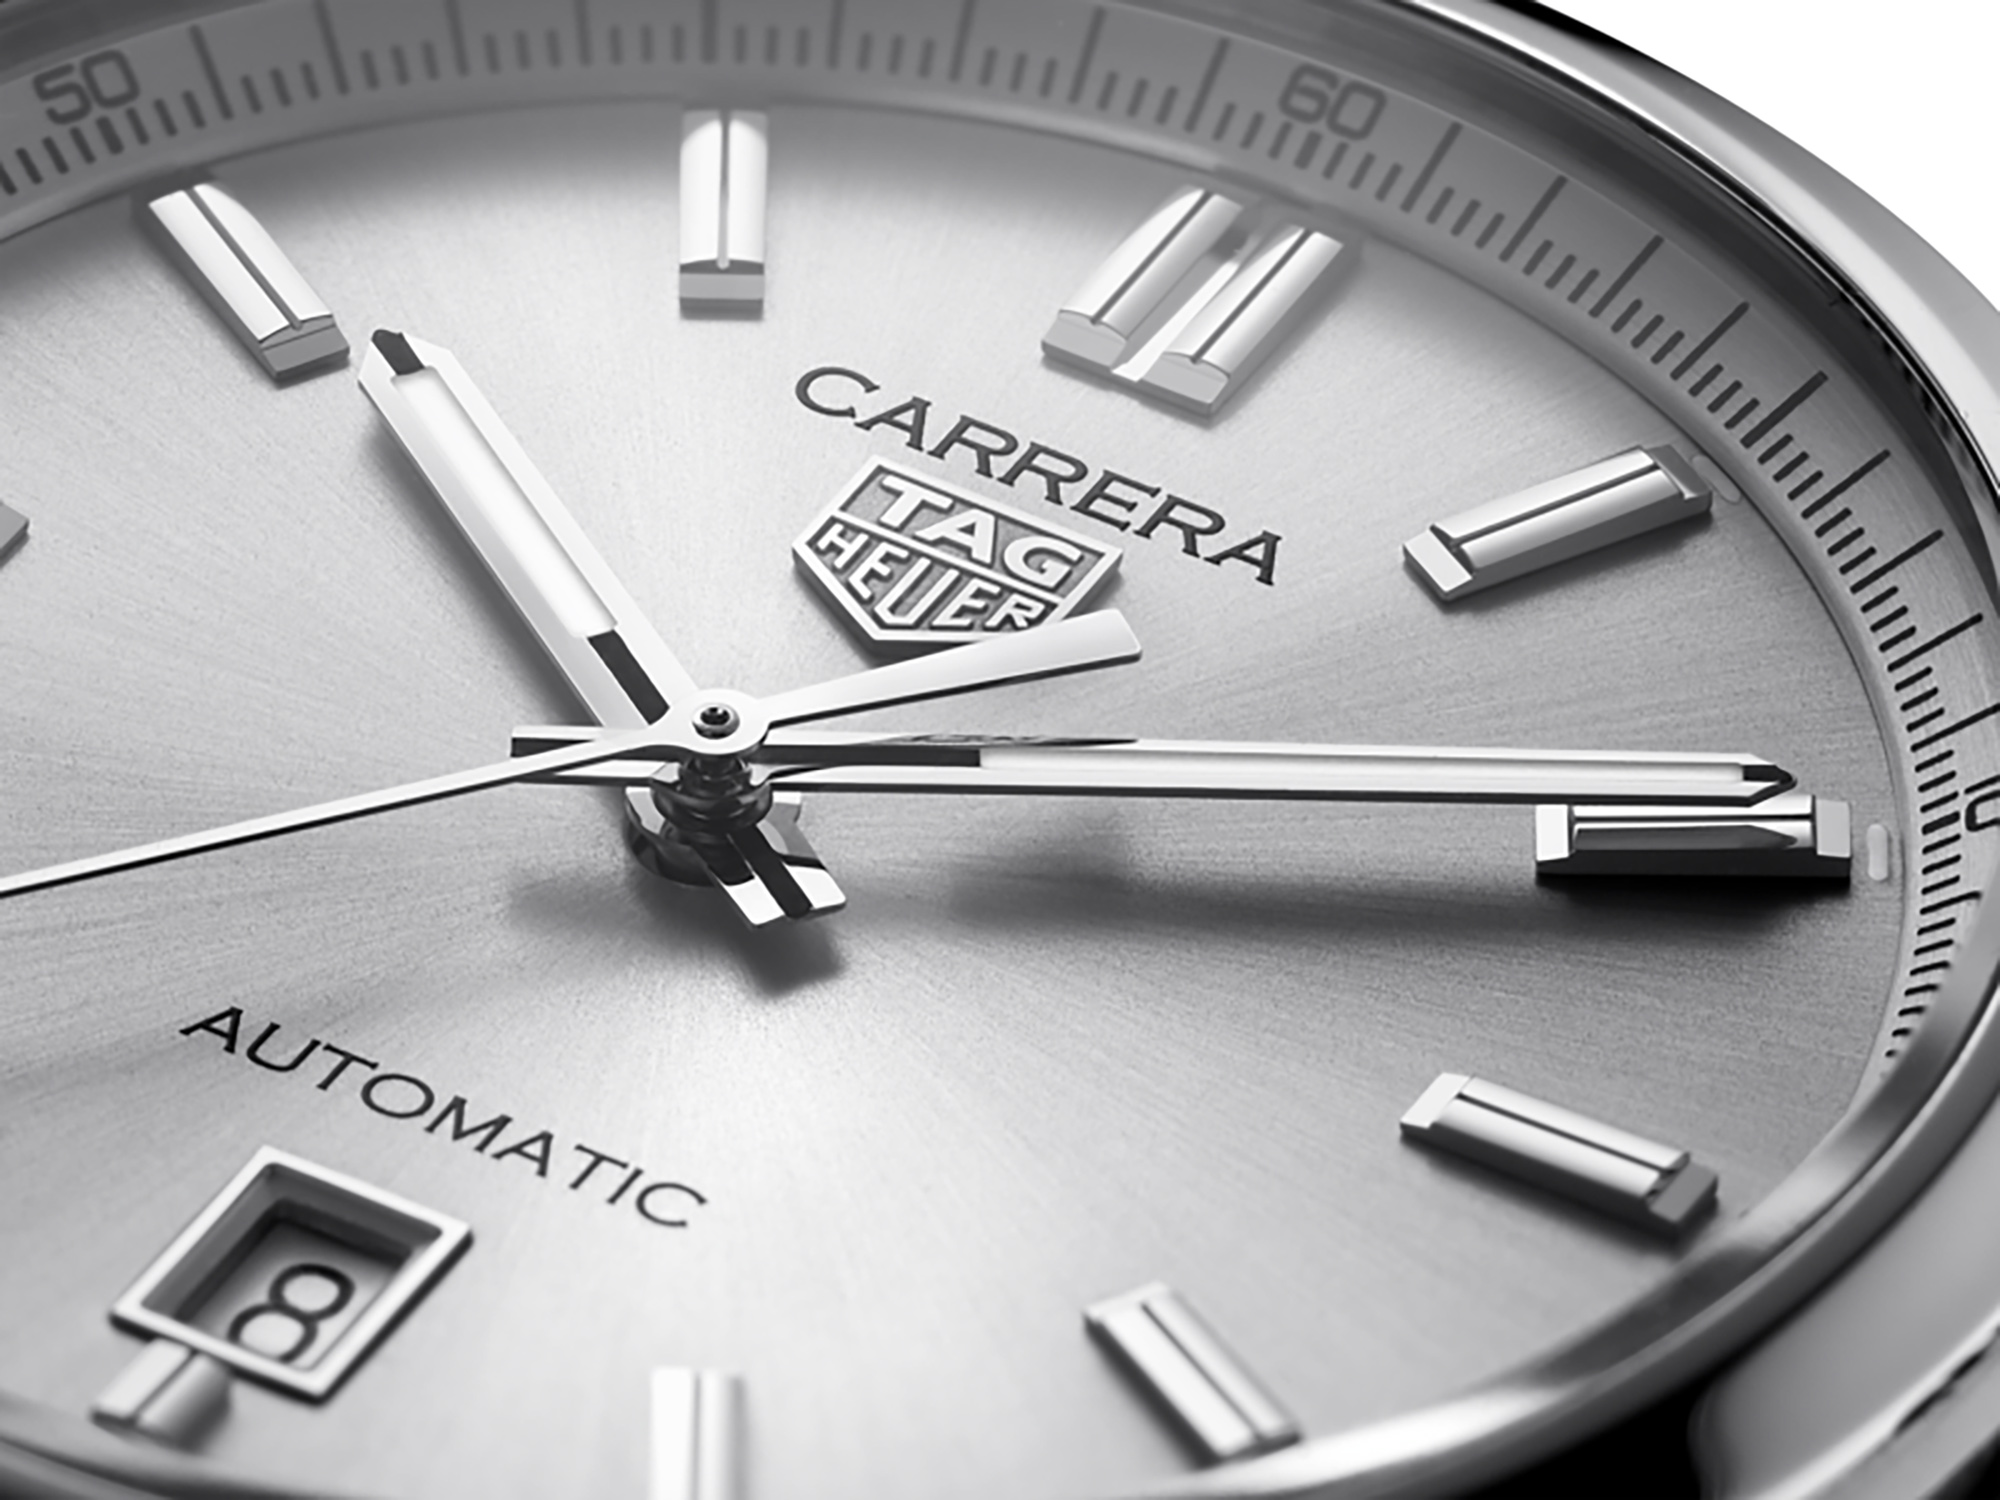 TAG Heuer - The Gray Man